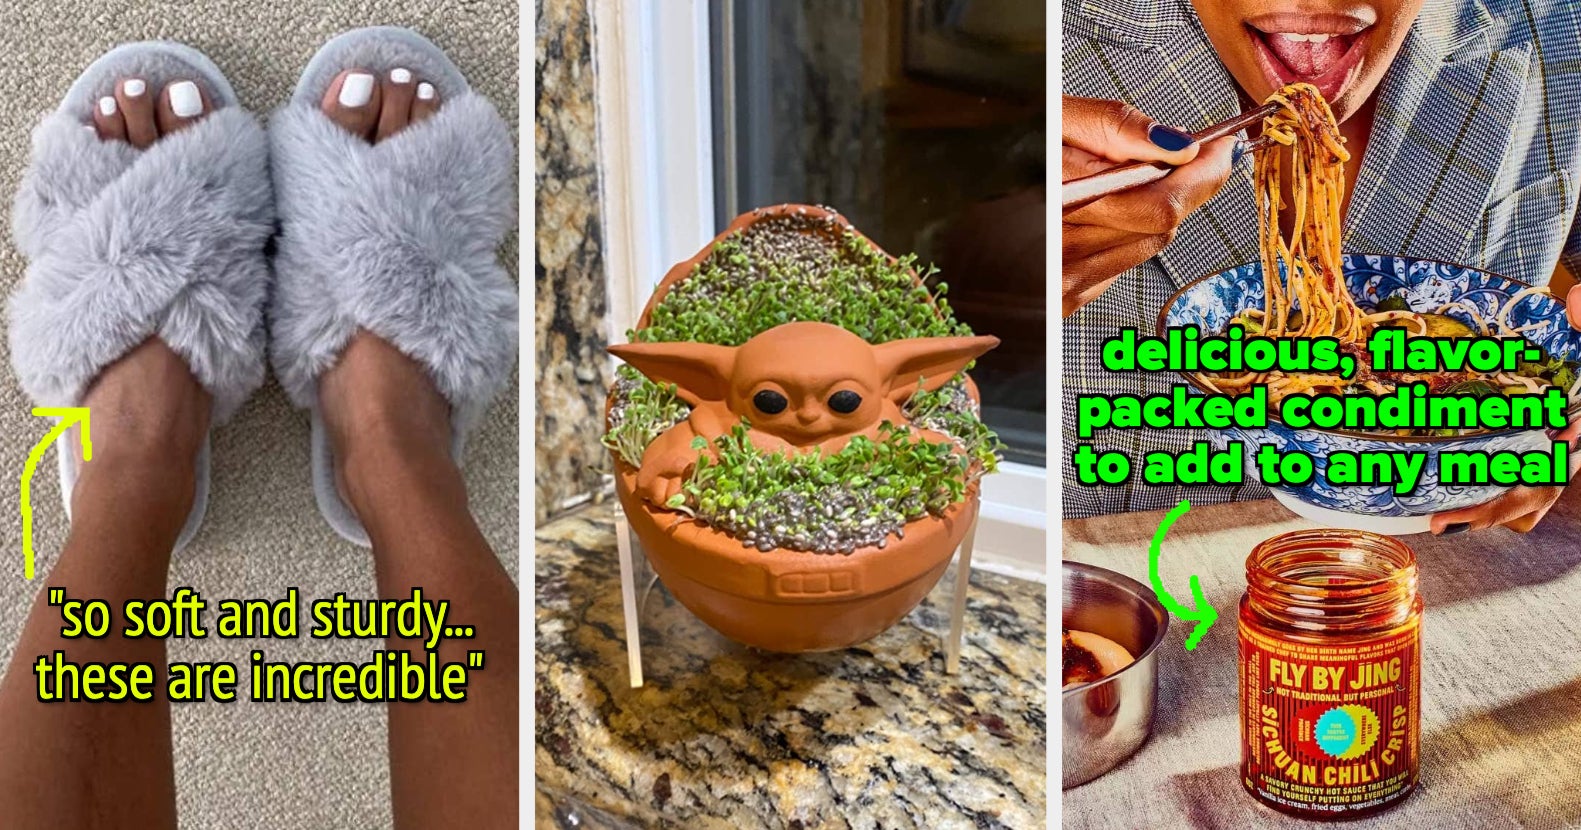 Baby Yoda Chia Pet you didn't know you needed just hit an  all-time  low at $17, more